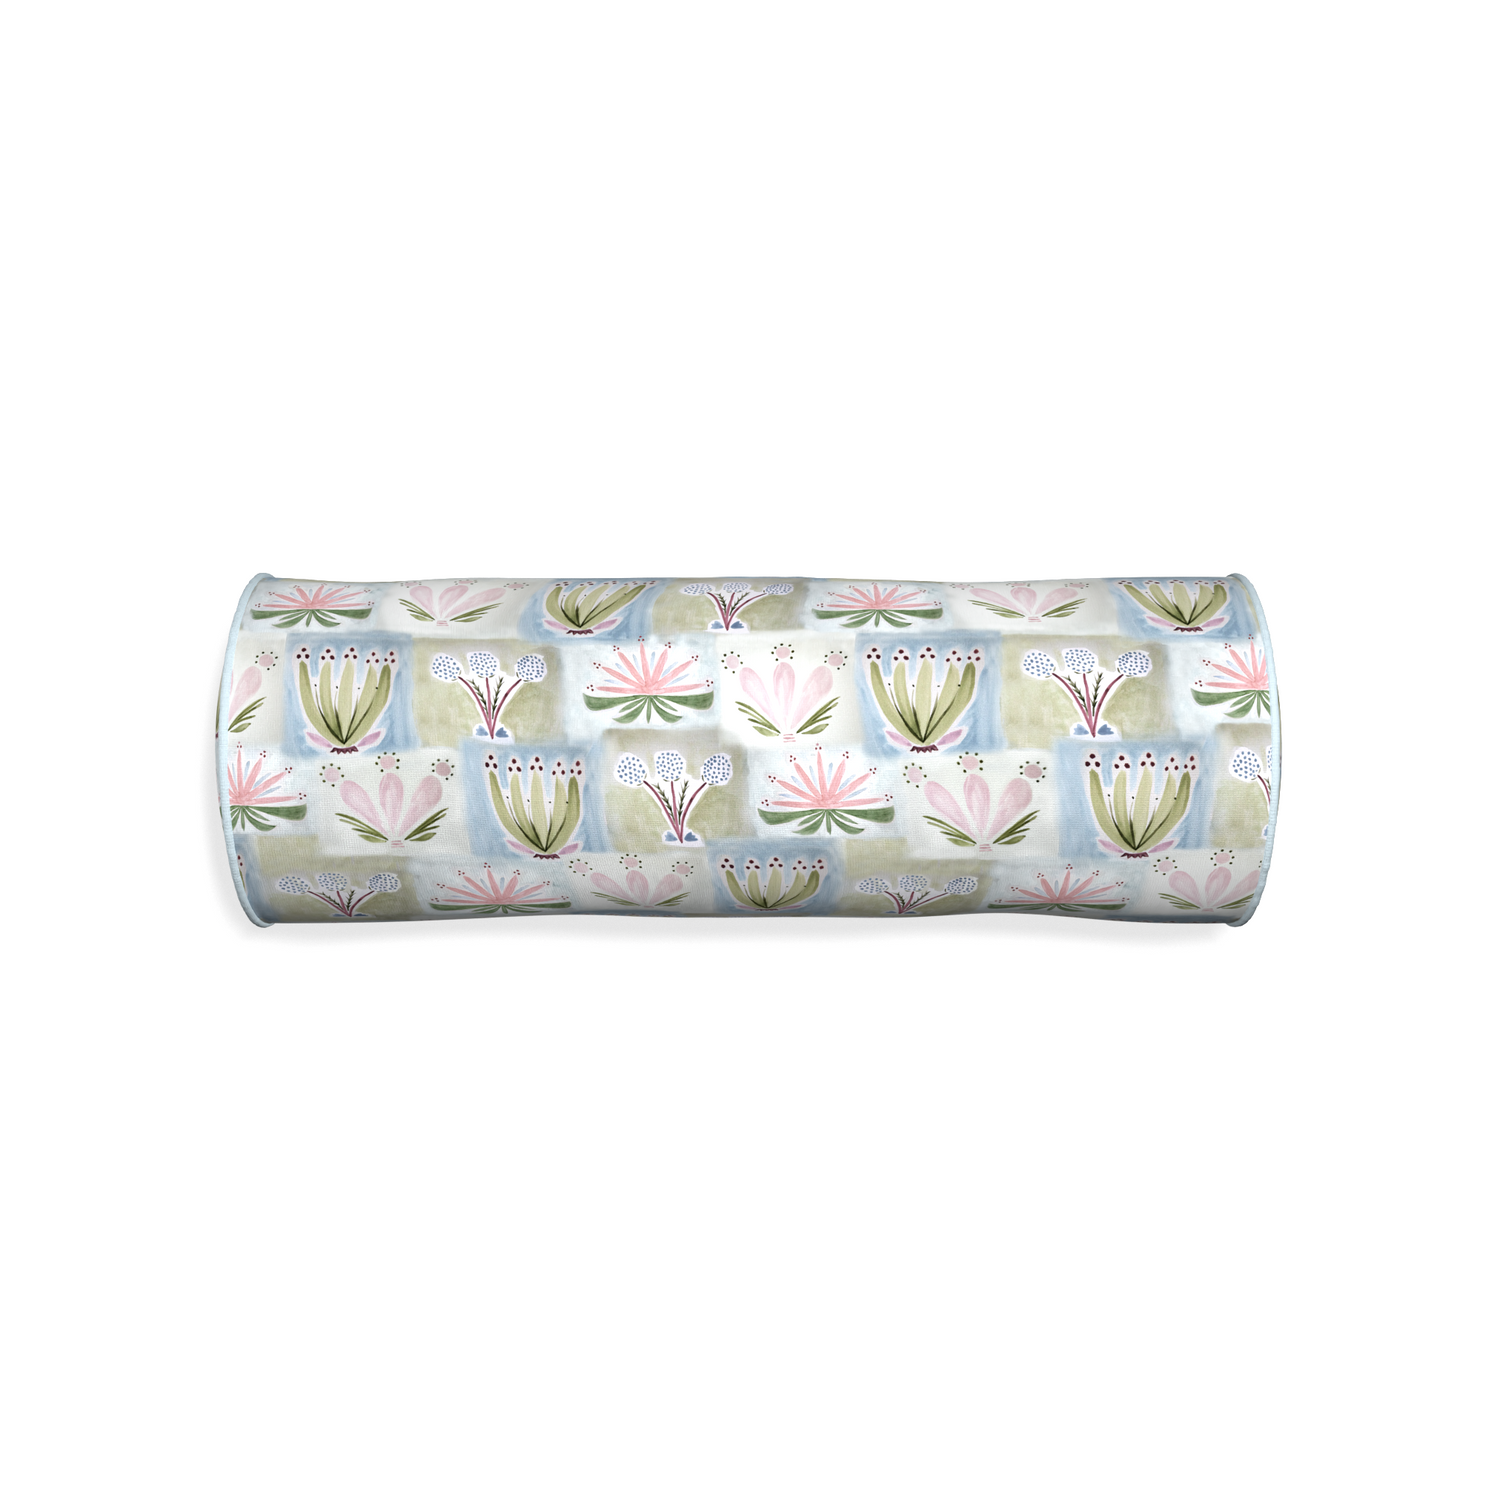 Bolster harper custom hand-painted floralpillow with powder piping on white background